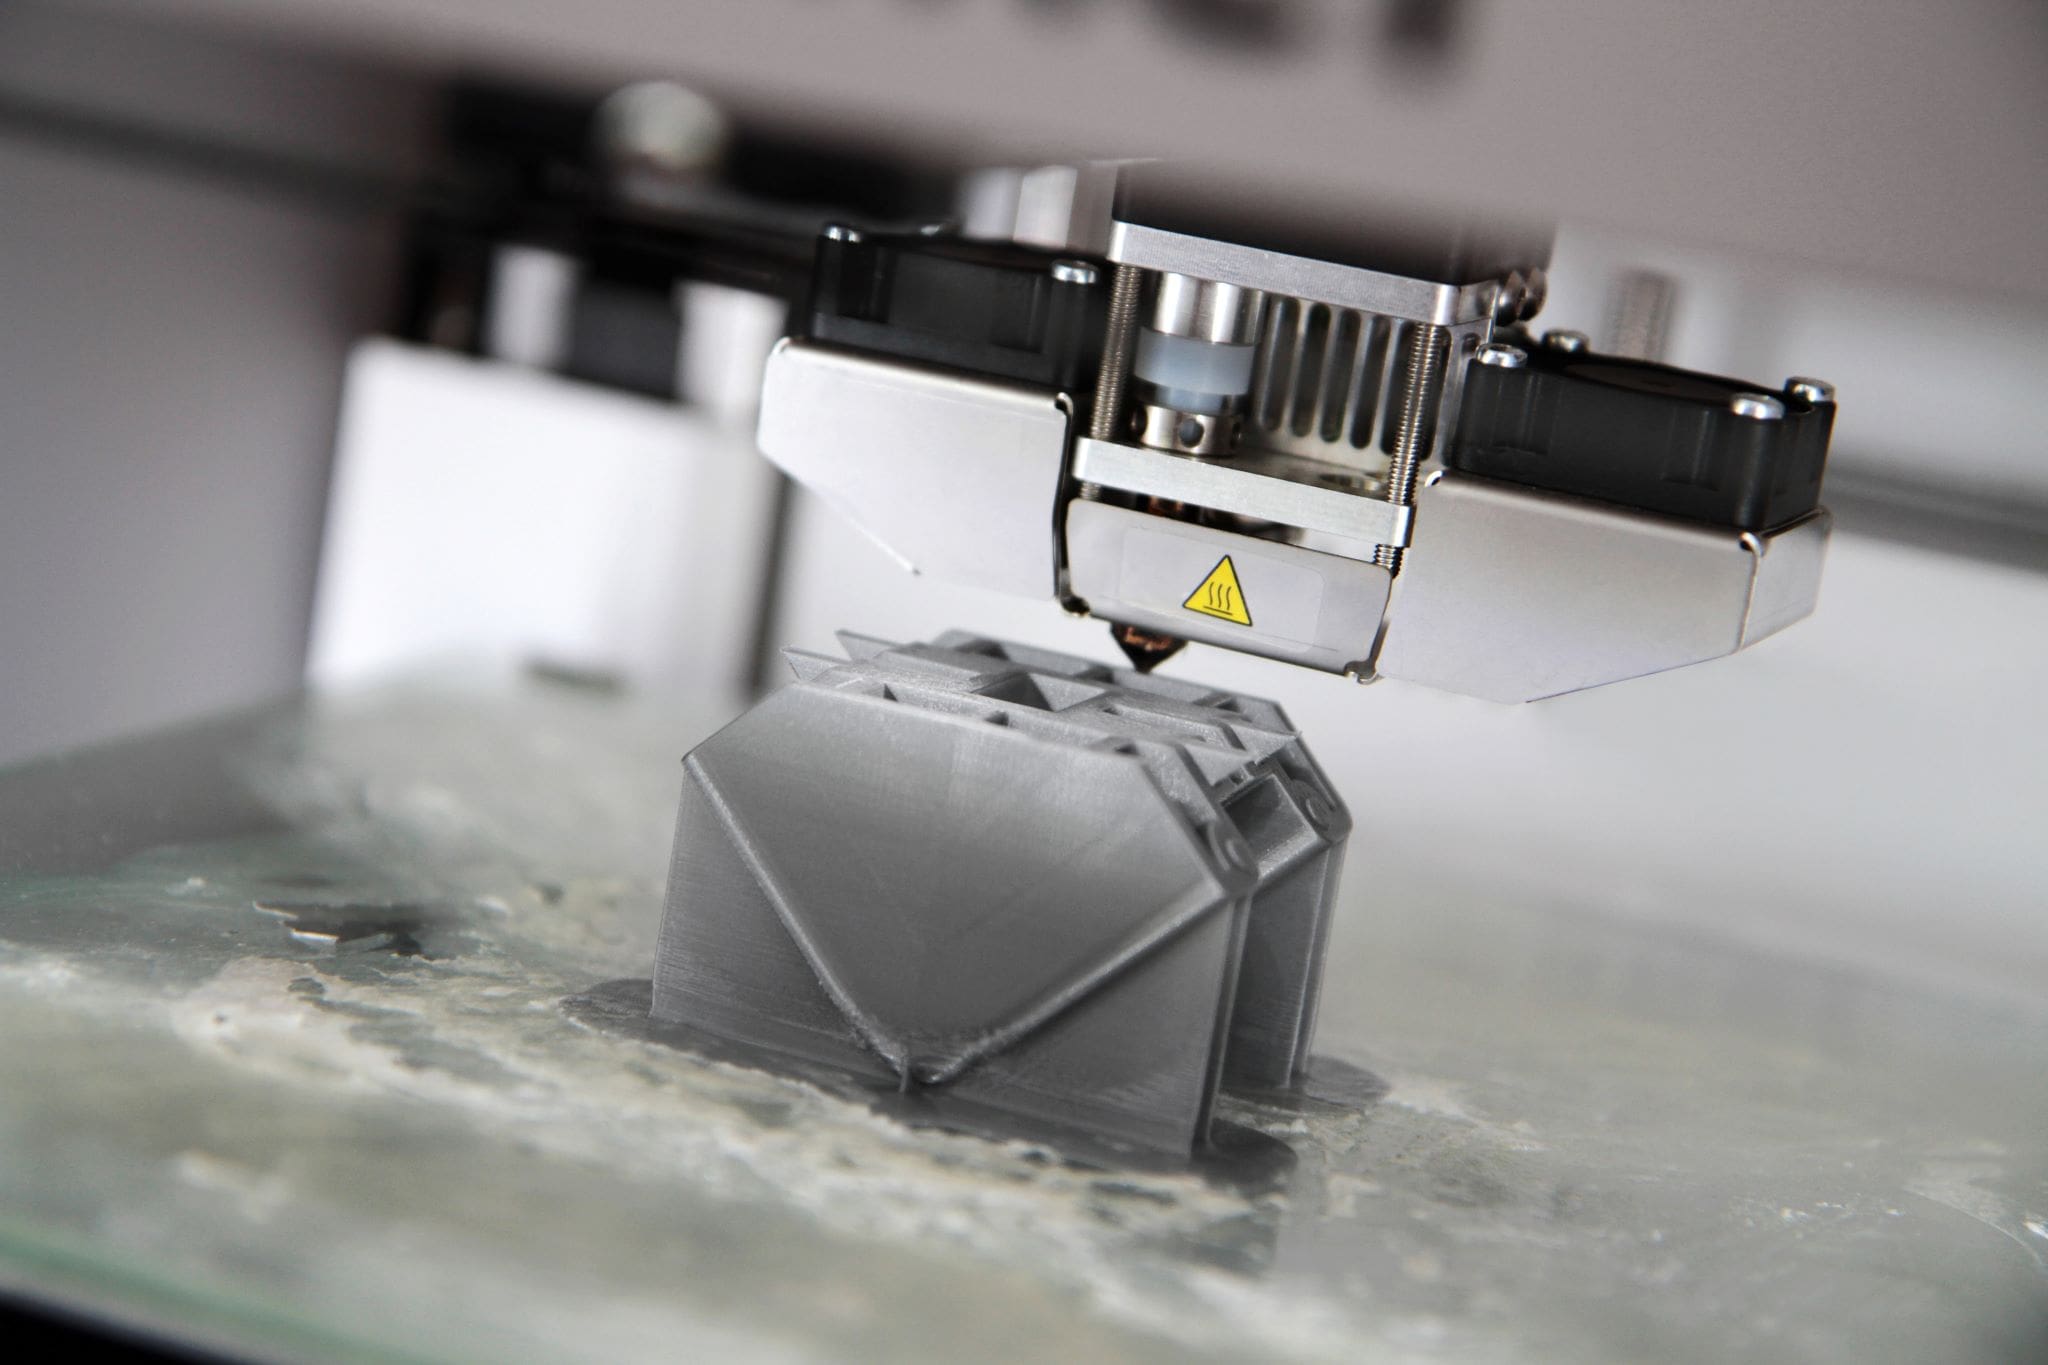 3D printer in process of additive manufacturing of an aerospace component